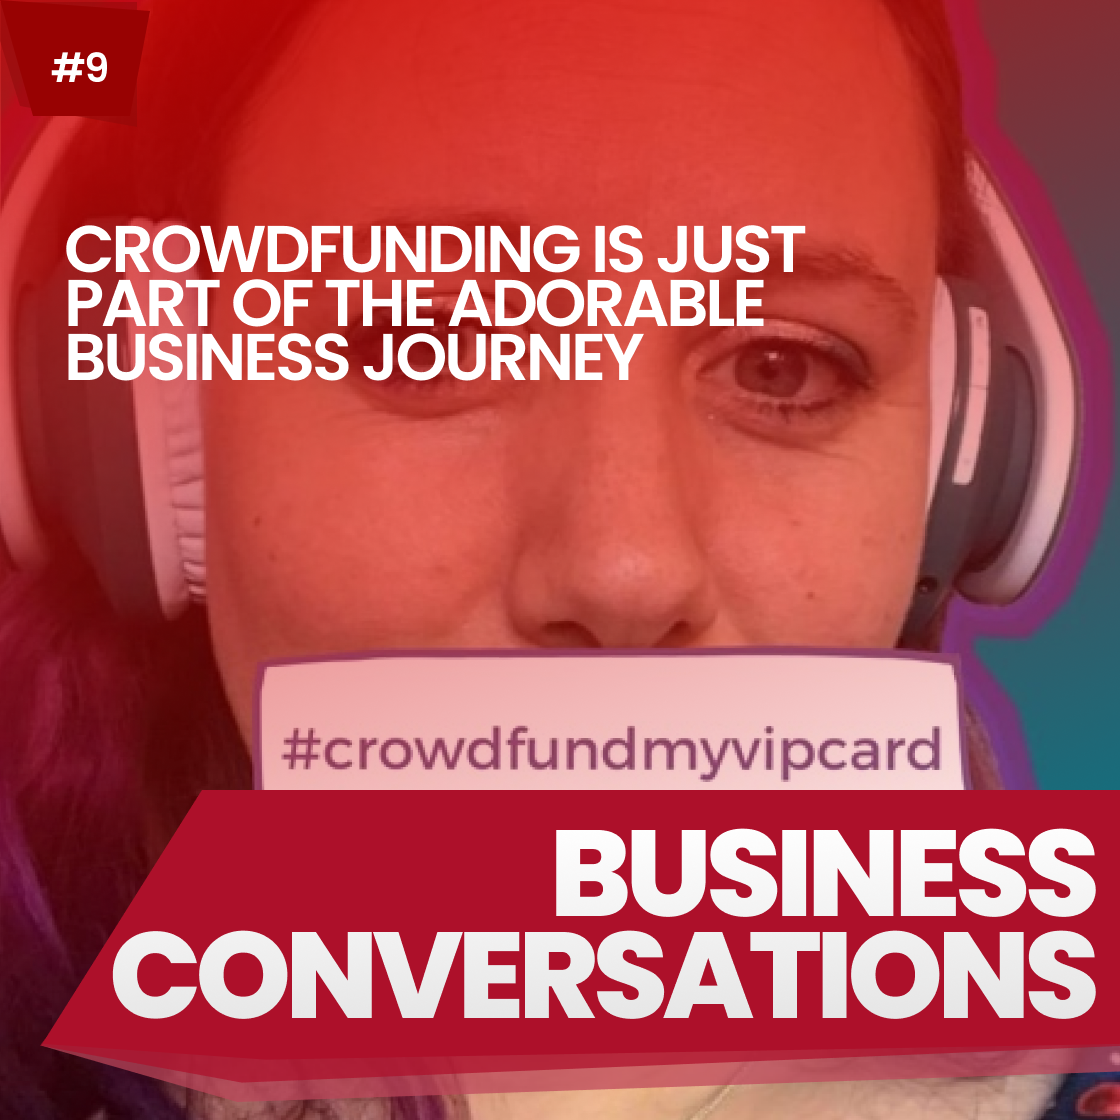 CROWDFUNDING IS JUST PART OF THE ADORABLE BUSINESS JOURNEY